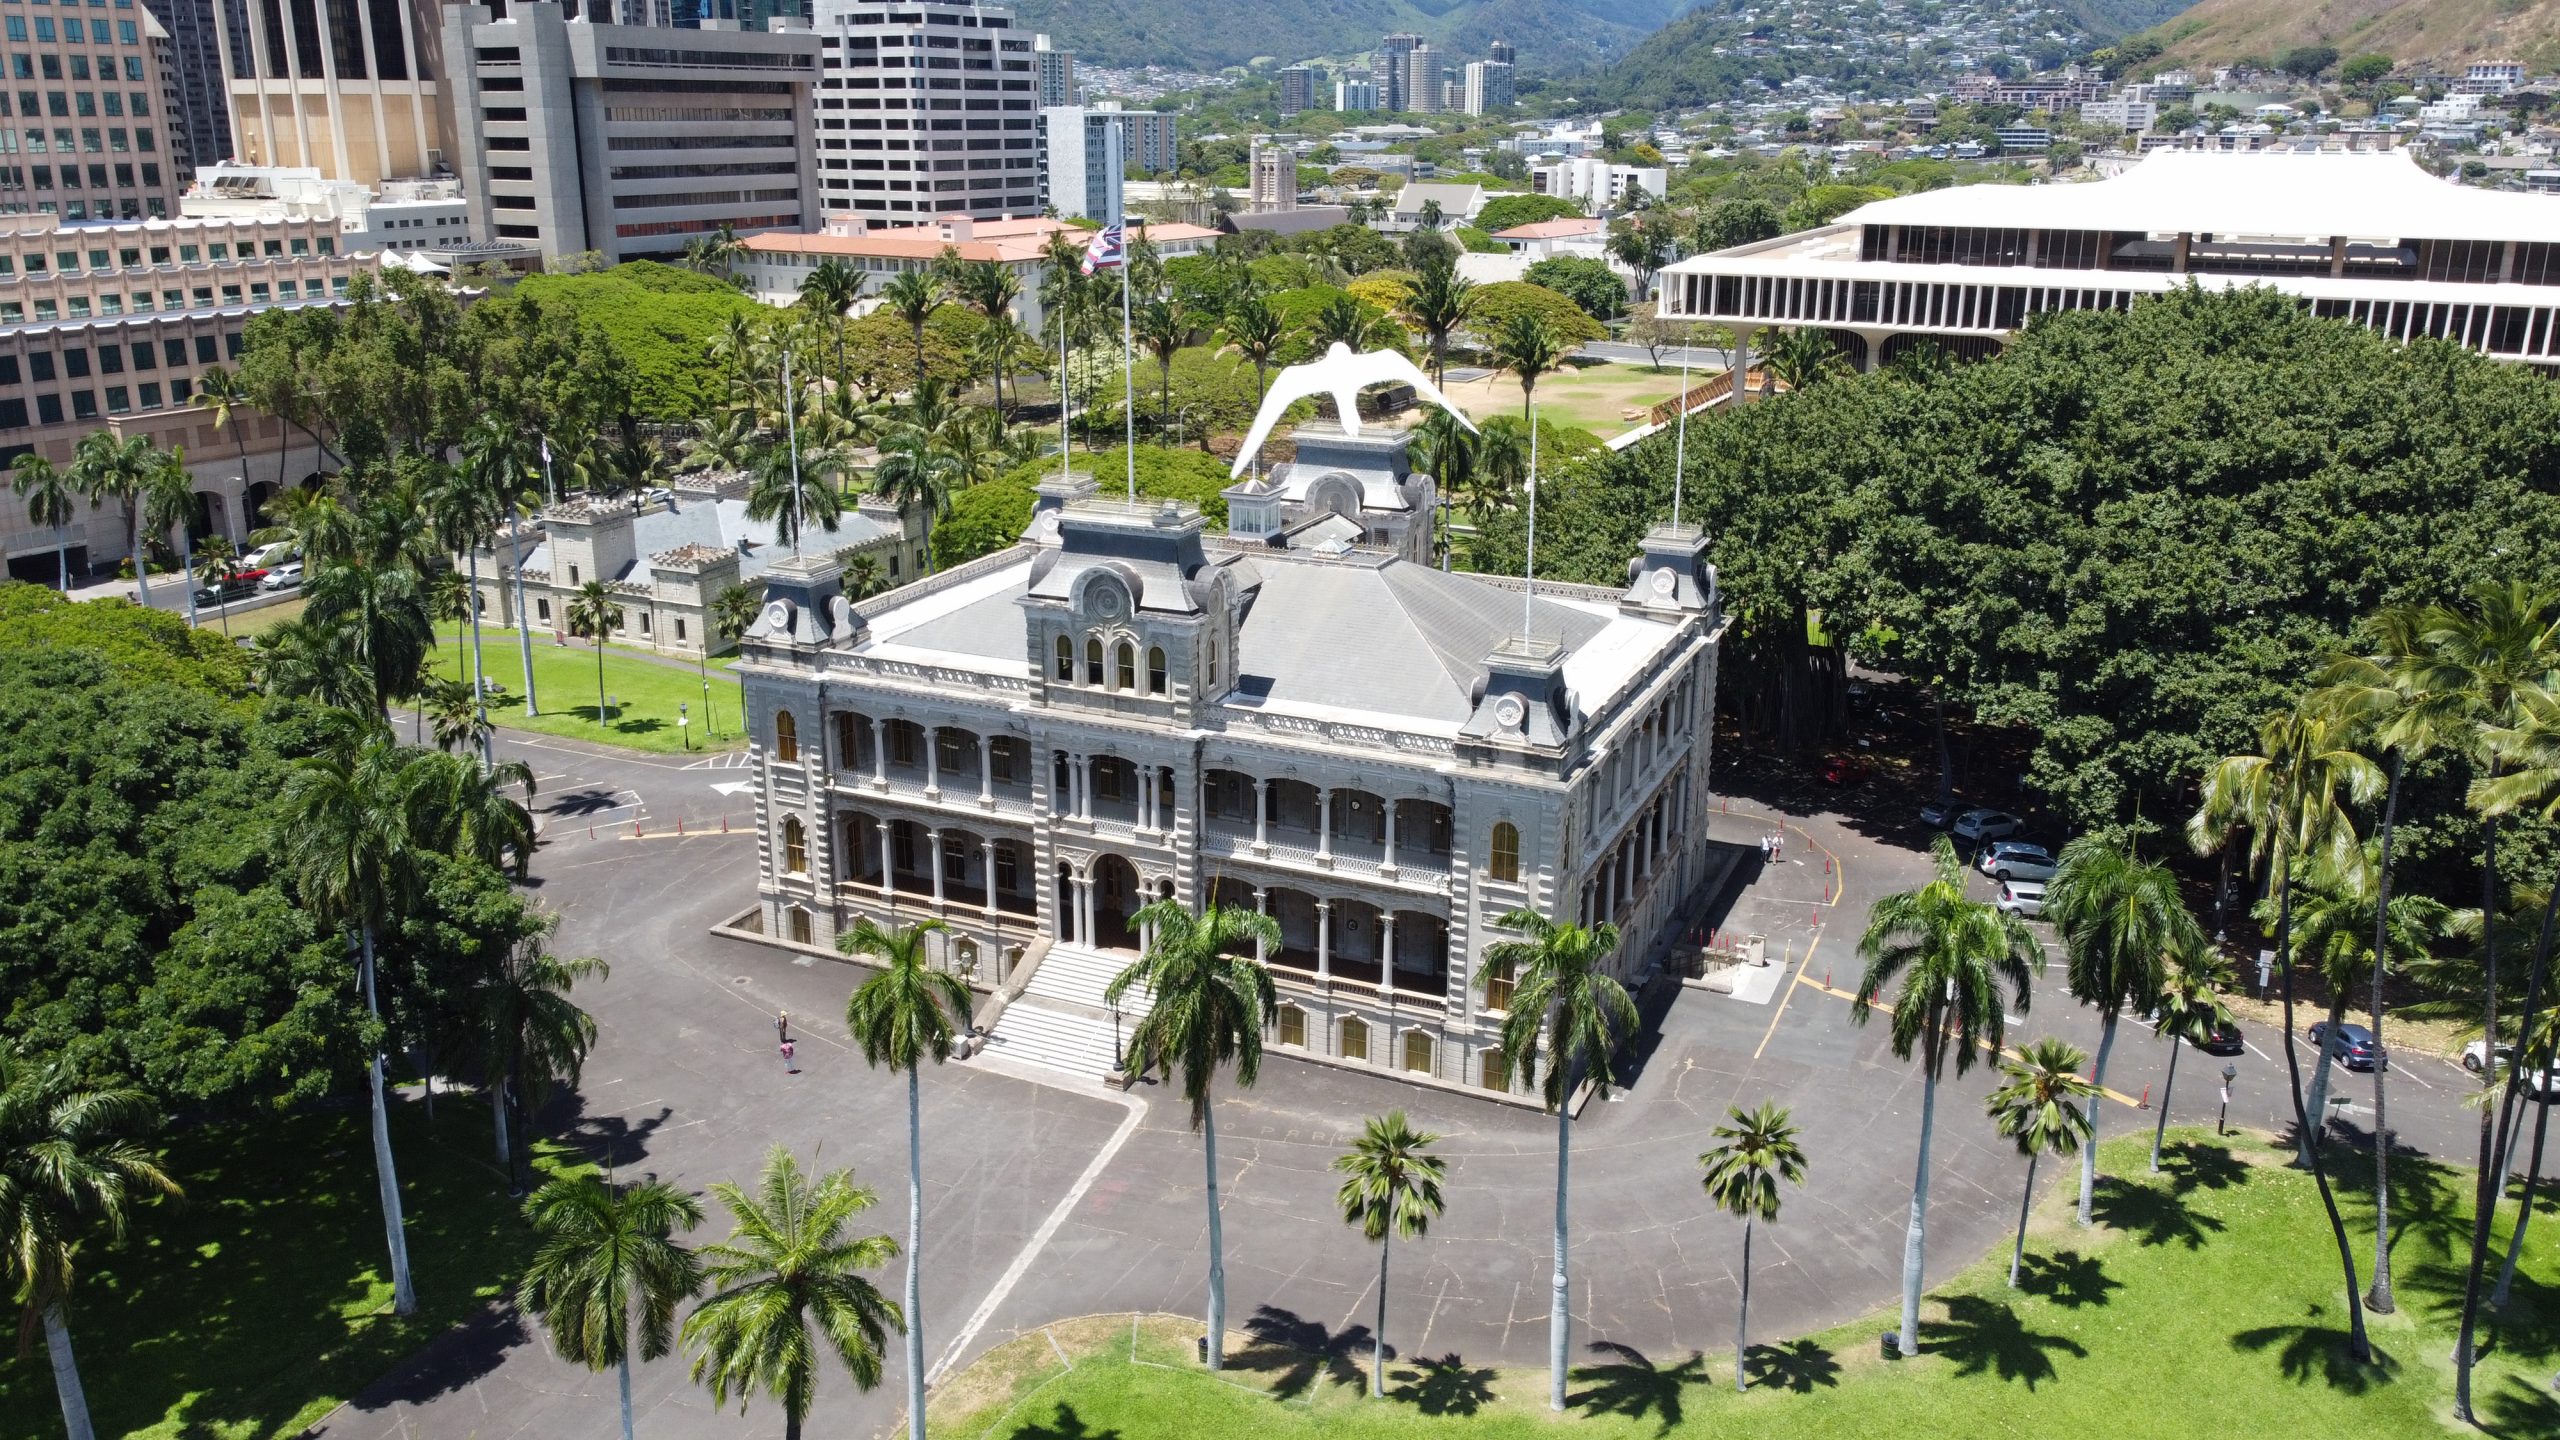  iolani-palace-things-to-do-Hawaii-culture